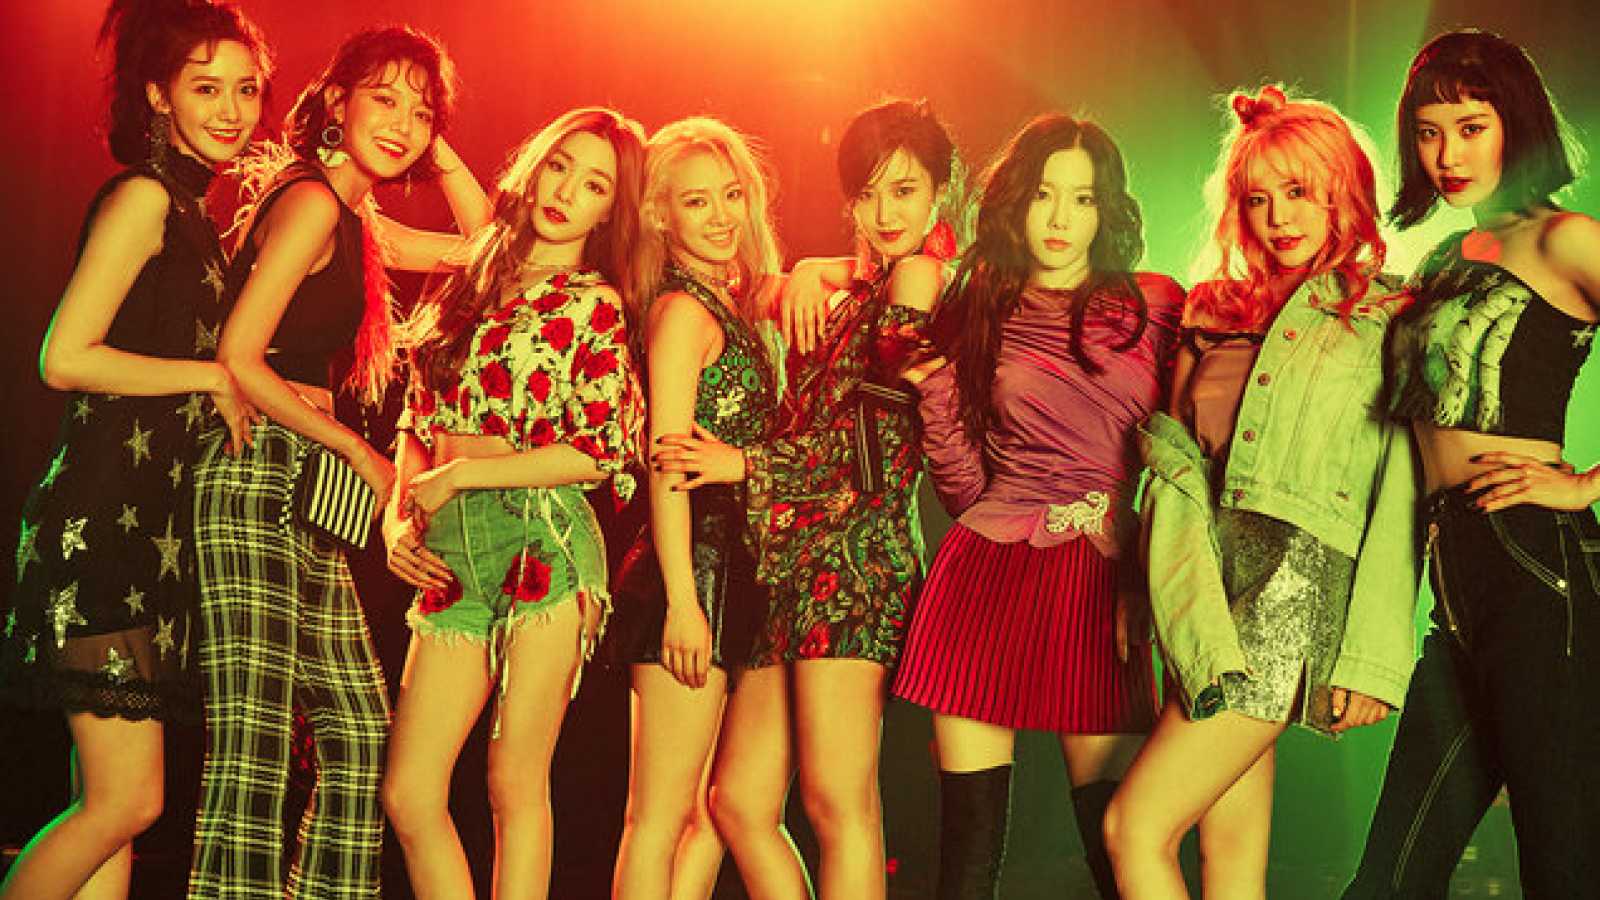 Girls' Generation © SM Entertainment. All rights reserved